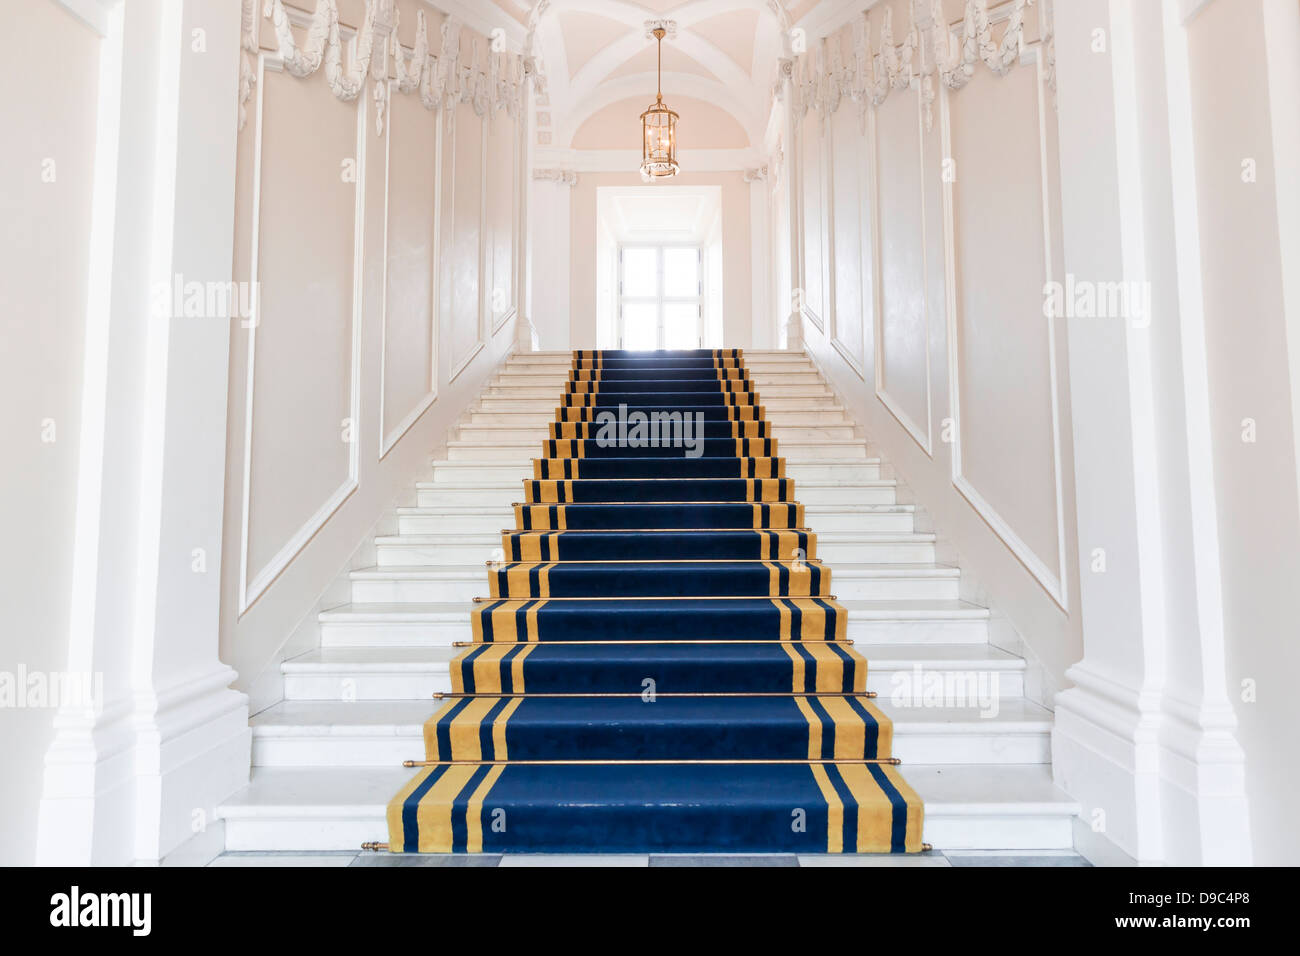 Stairwell in the Polish palace. Royal castle in Warsaw on World Heritage List. Stock Photo